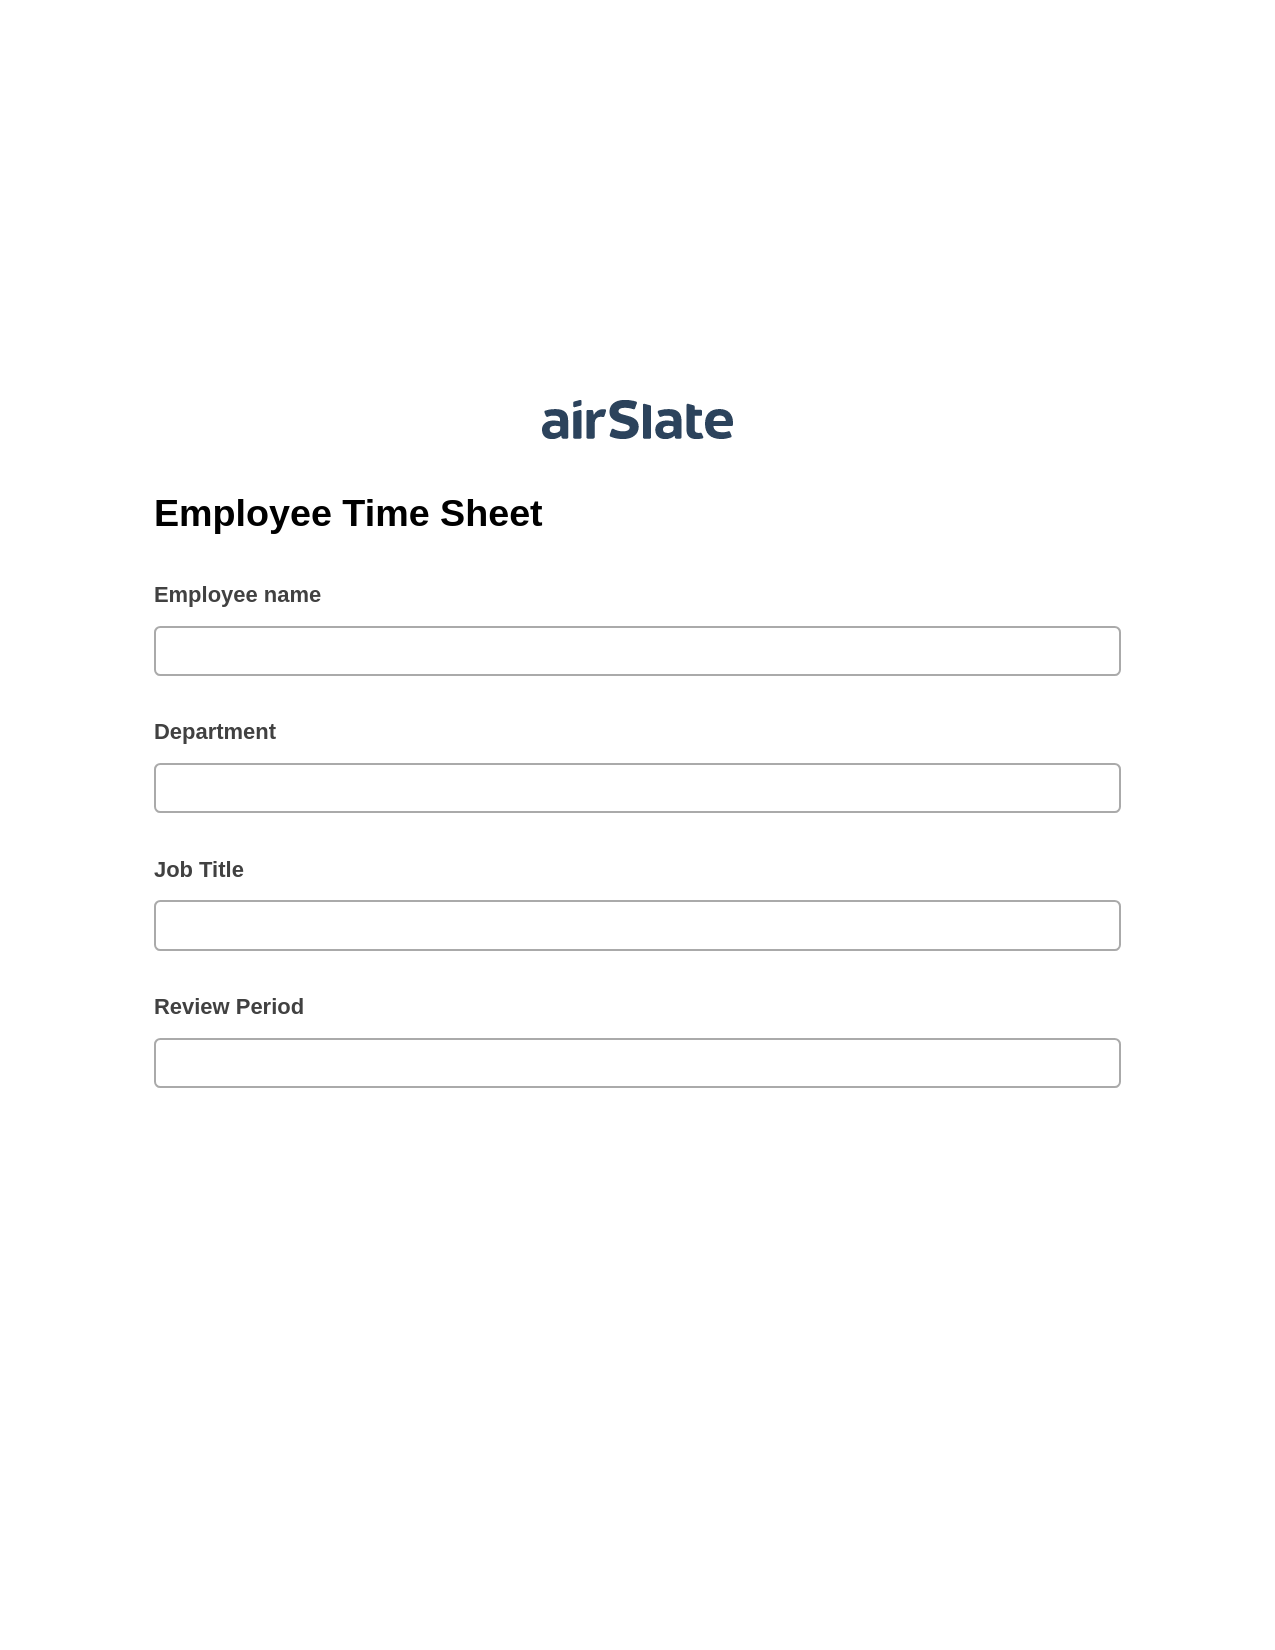 Employee Time Sheet System Bot - Slack Two-Way Binding Bot, Custom Field's Value Bot, Archive to OneDrive Bot